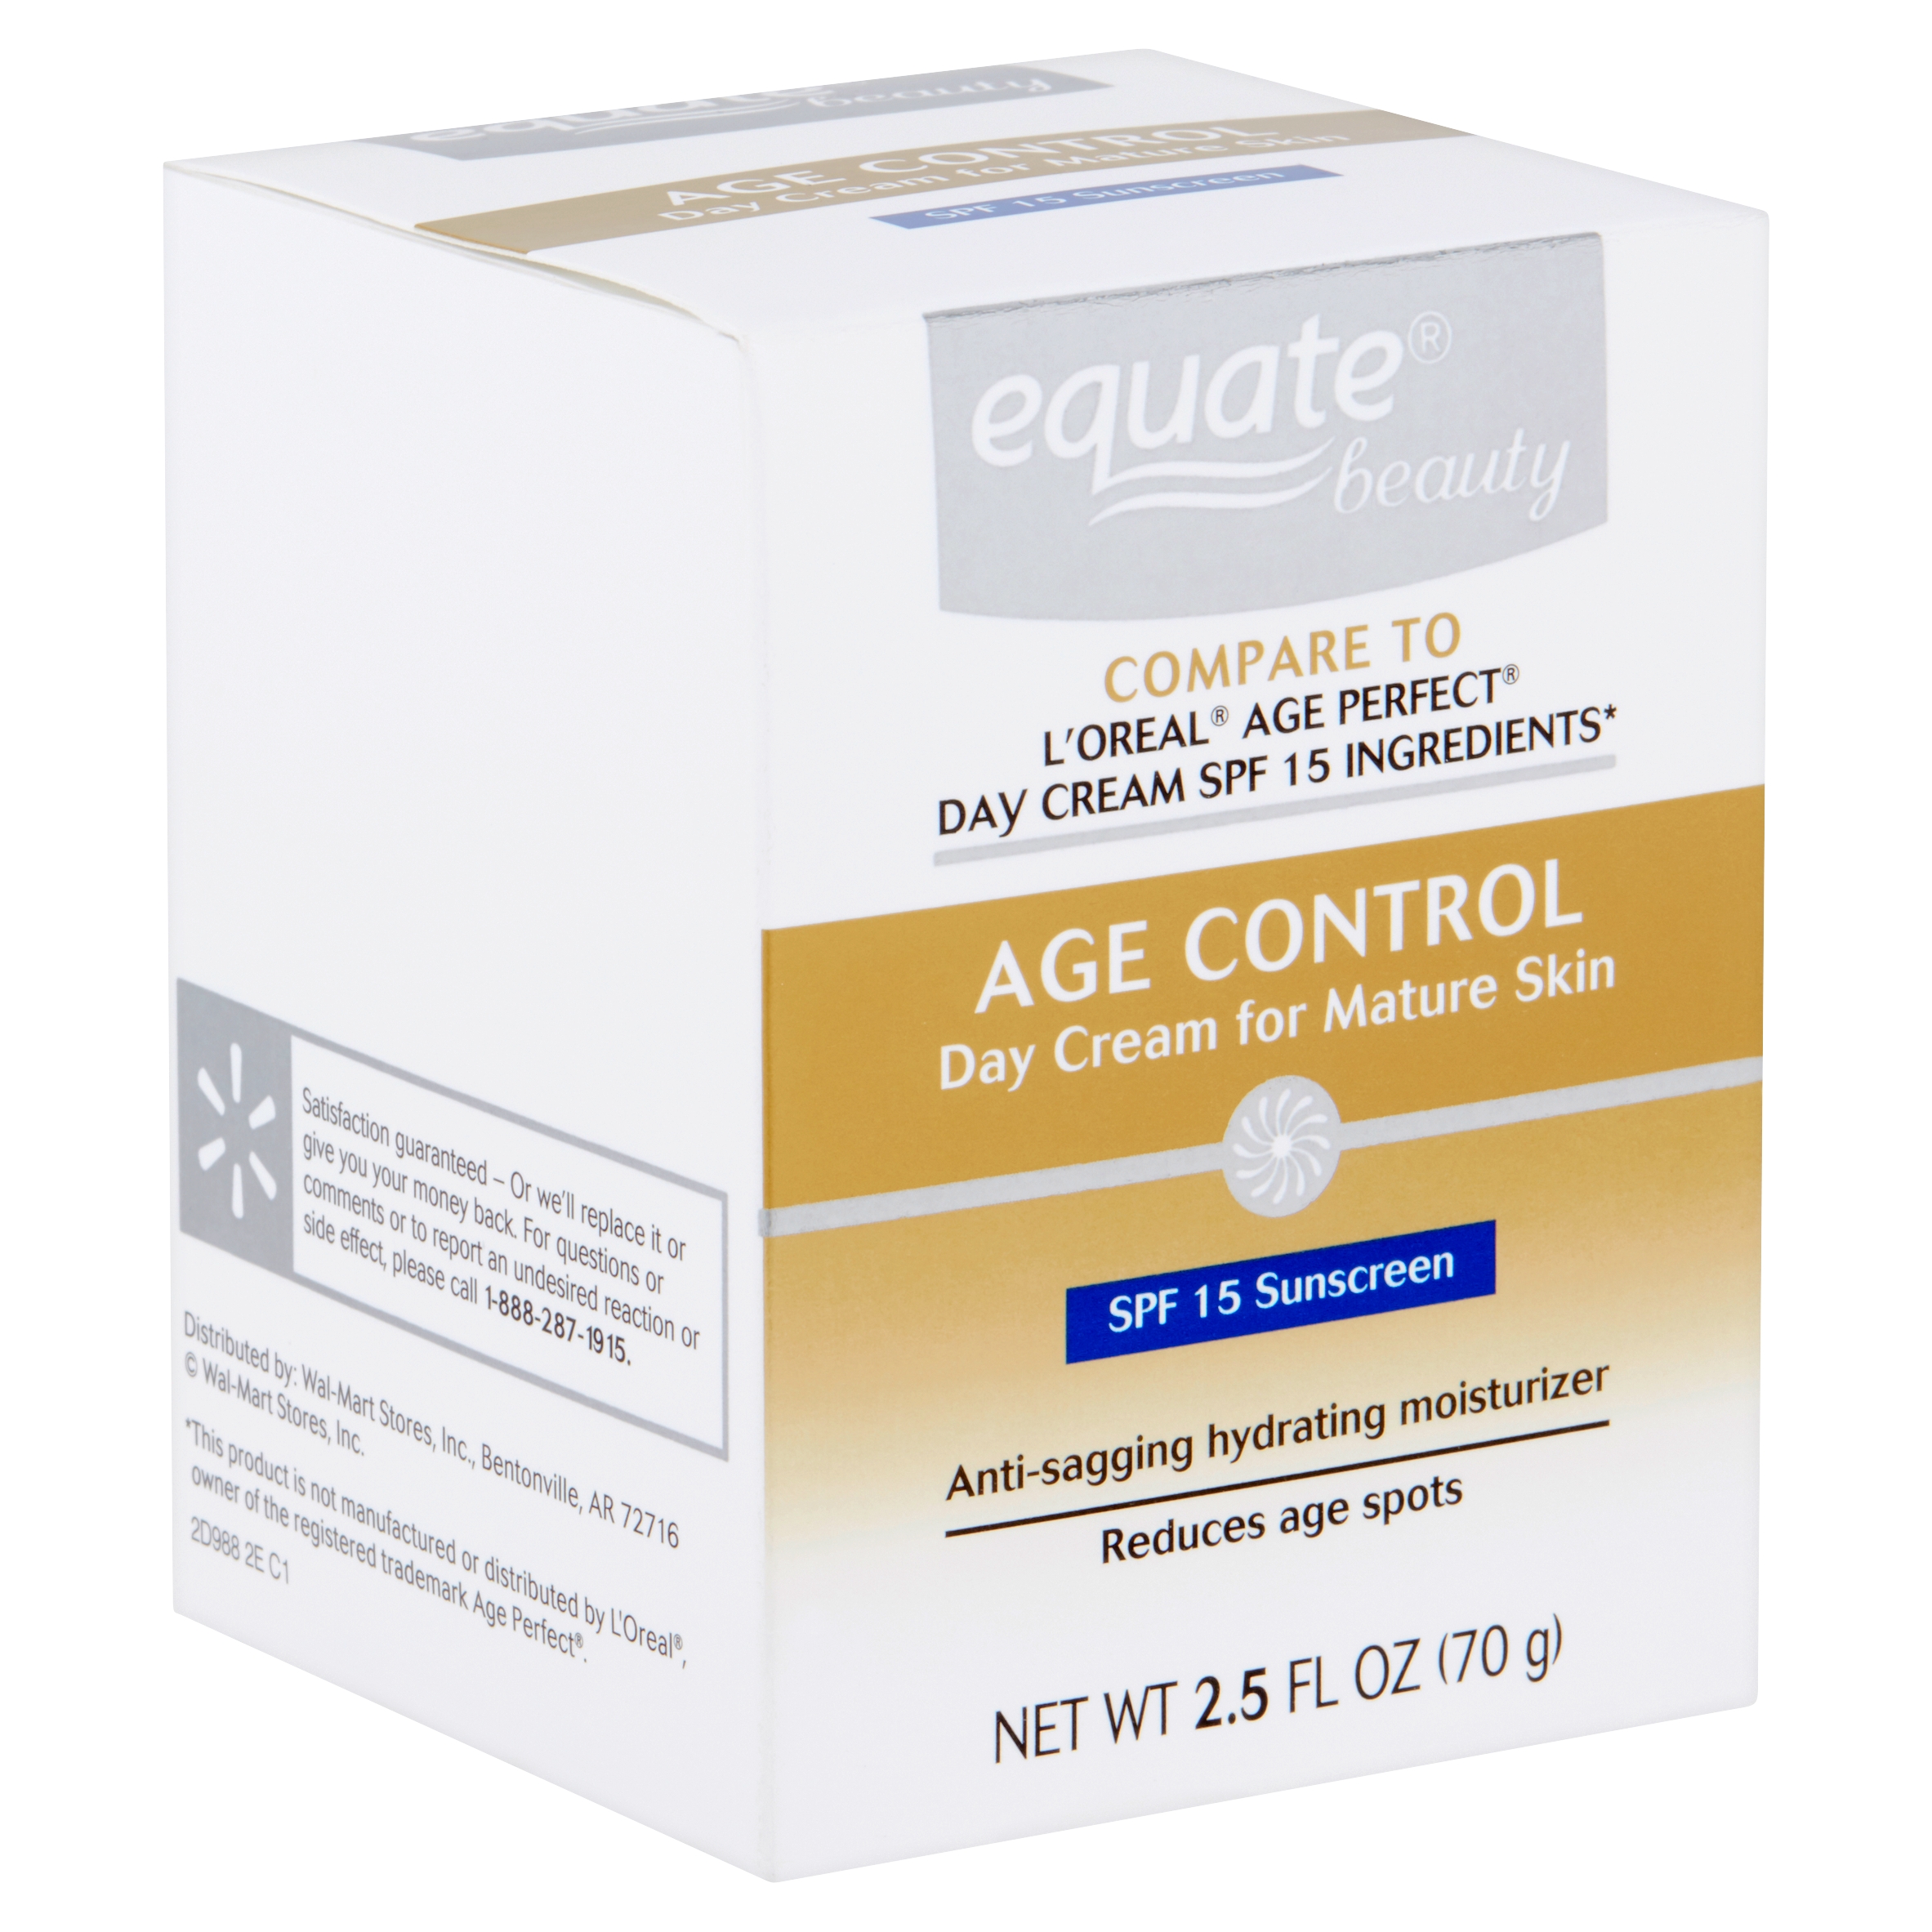 Equate Beauty Age Control Day Cream for Mature Skin Sunscreen, SPF 15, 2.5 fl oz - image 1 of 10